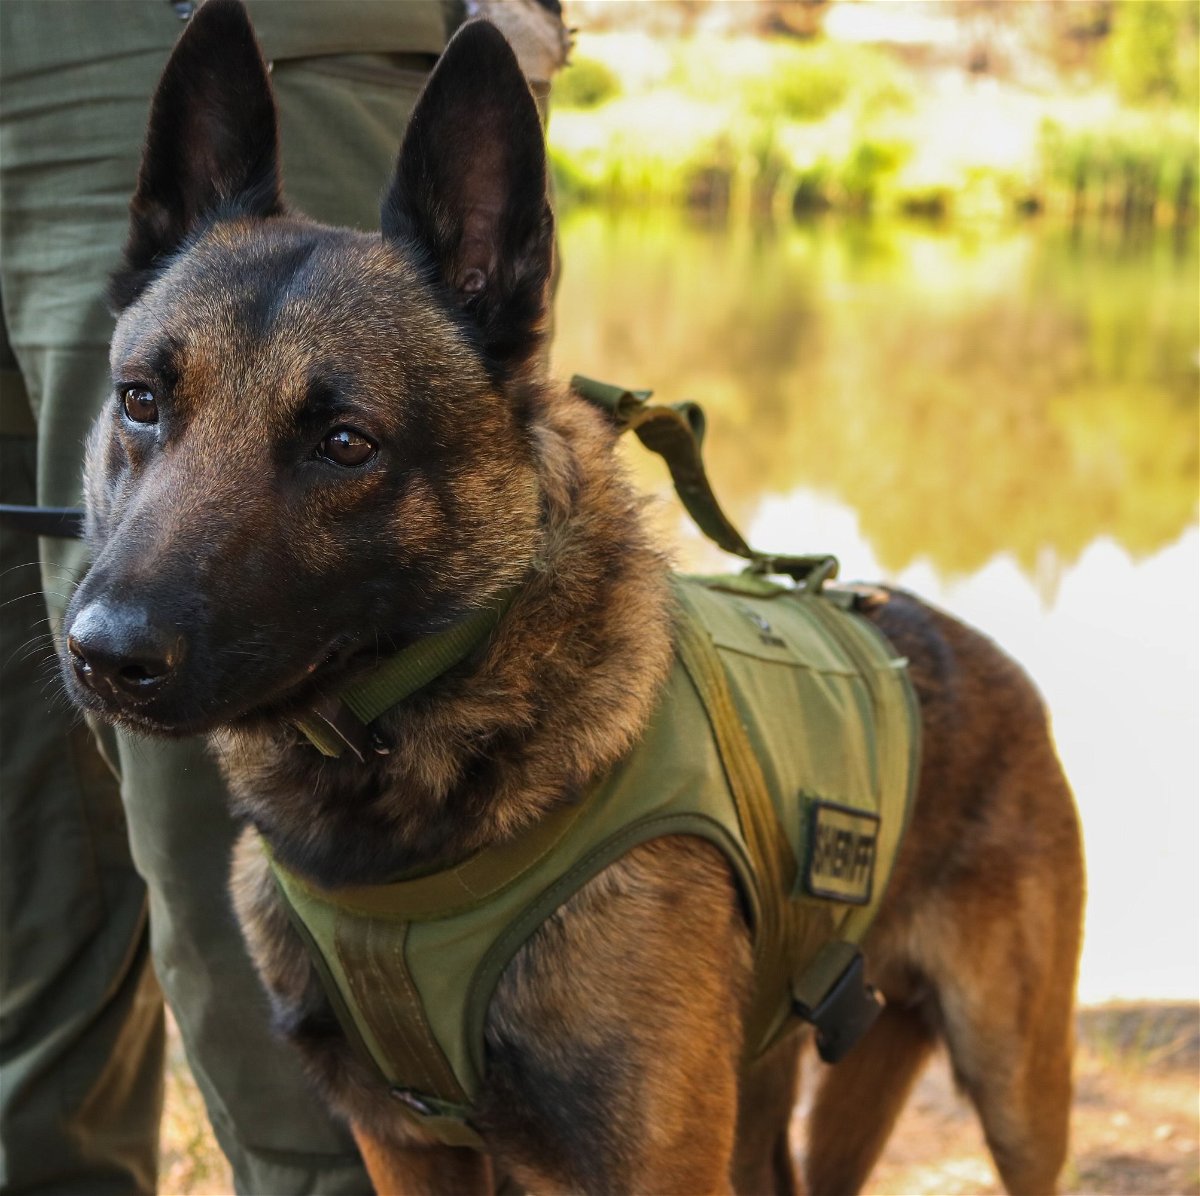 DCSO K-9s fitted for duty with new, possibly life-saving gear: doggy body armor